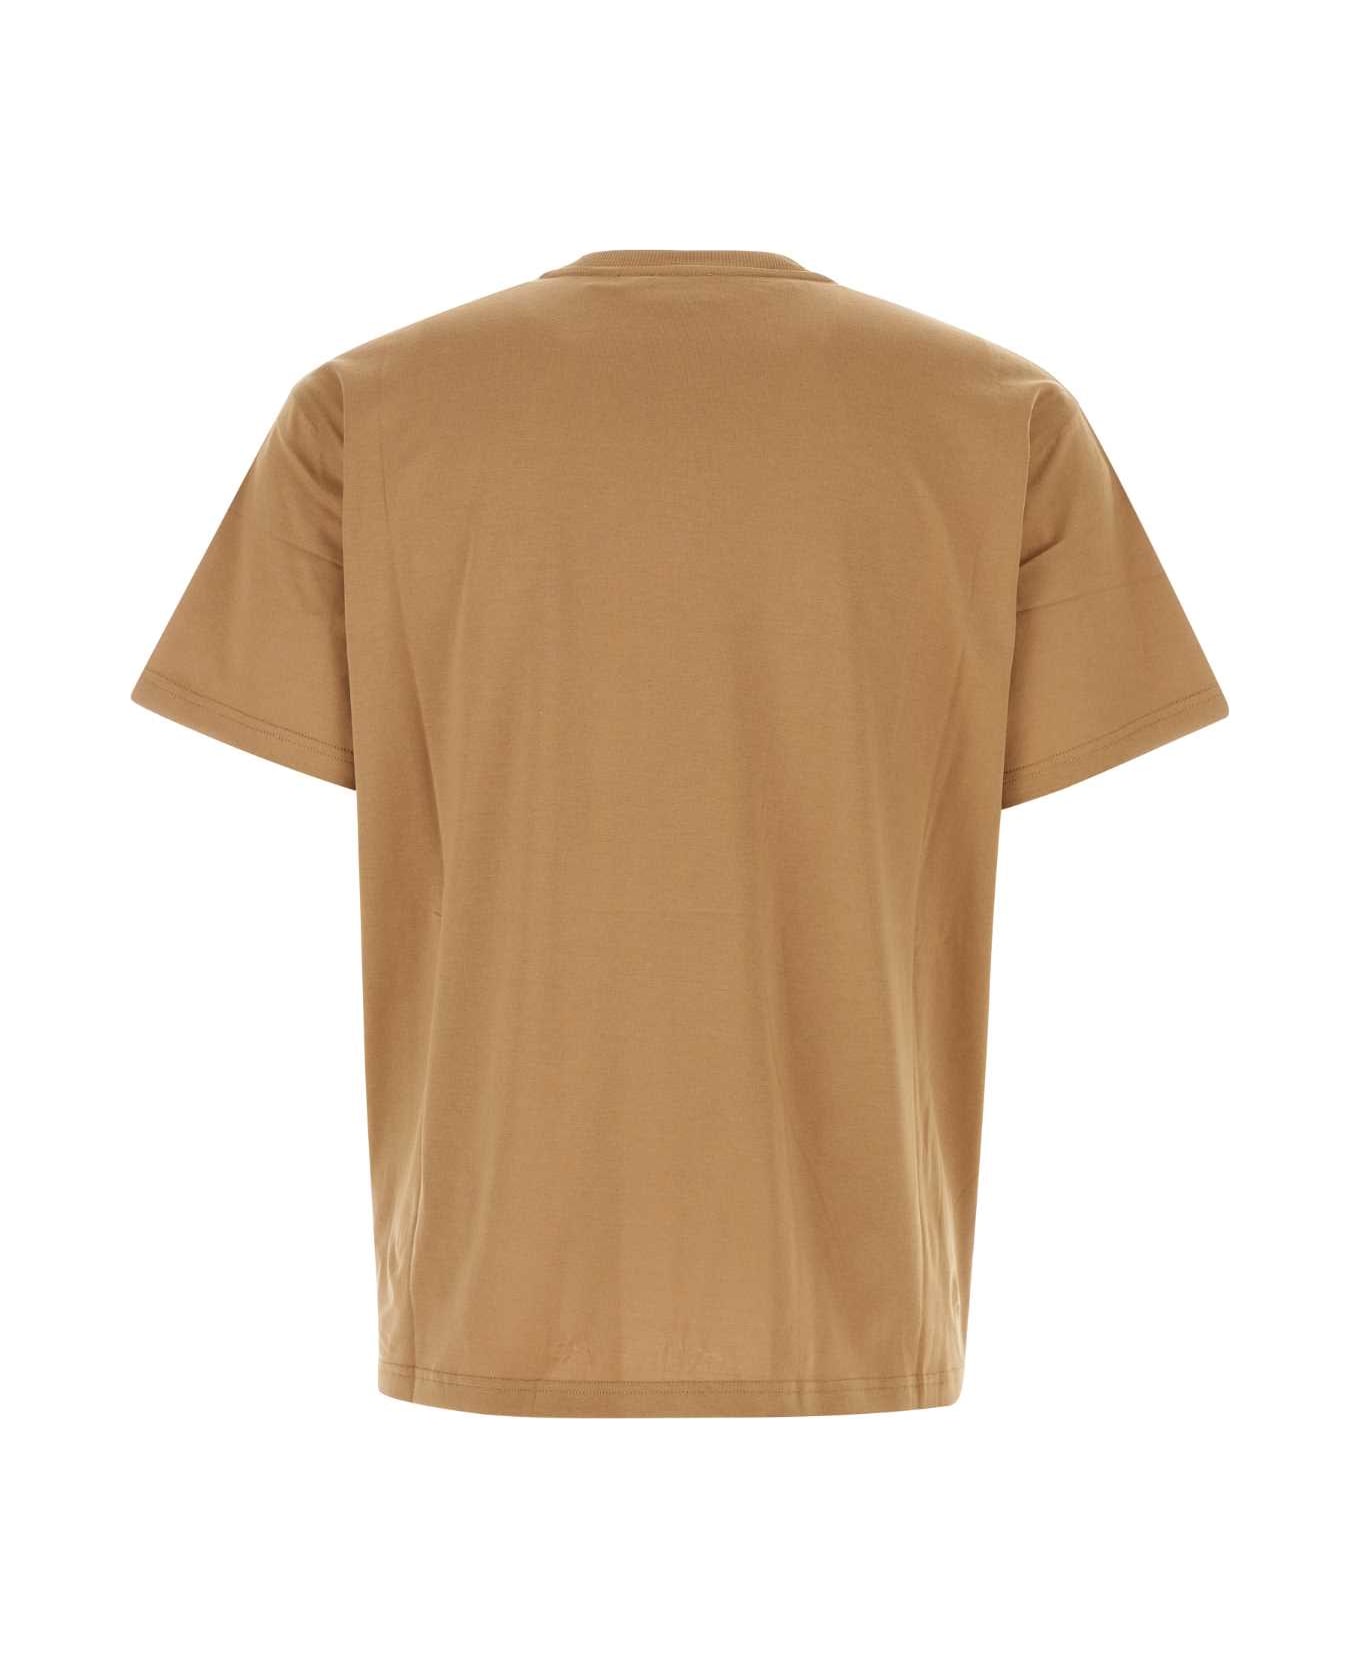 Burberry Biscuit Cotton T-shirt - CAMEL